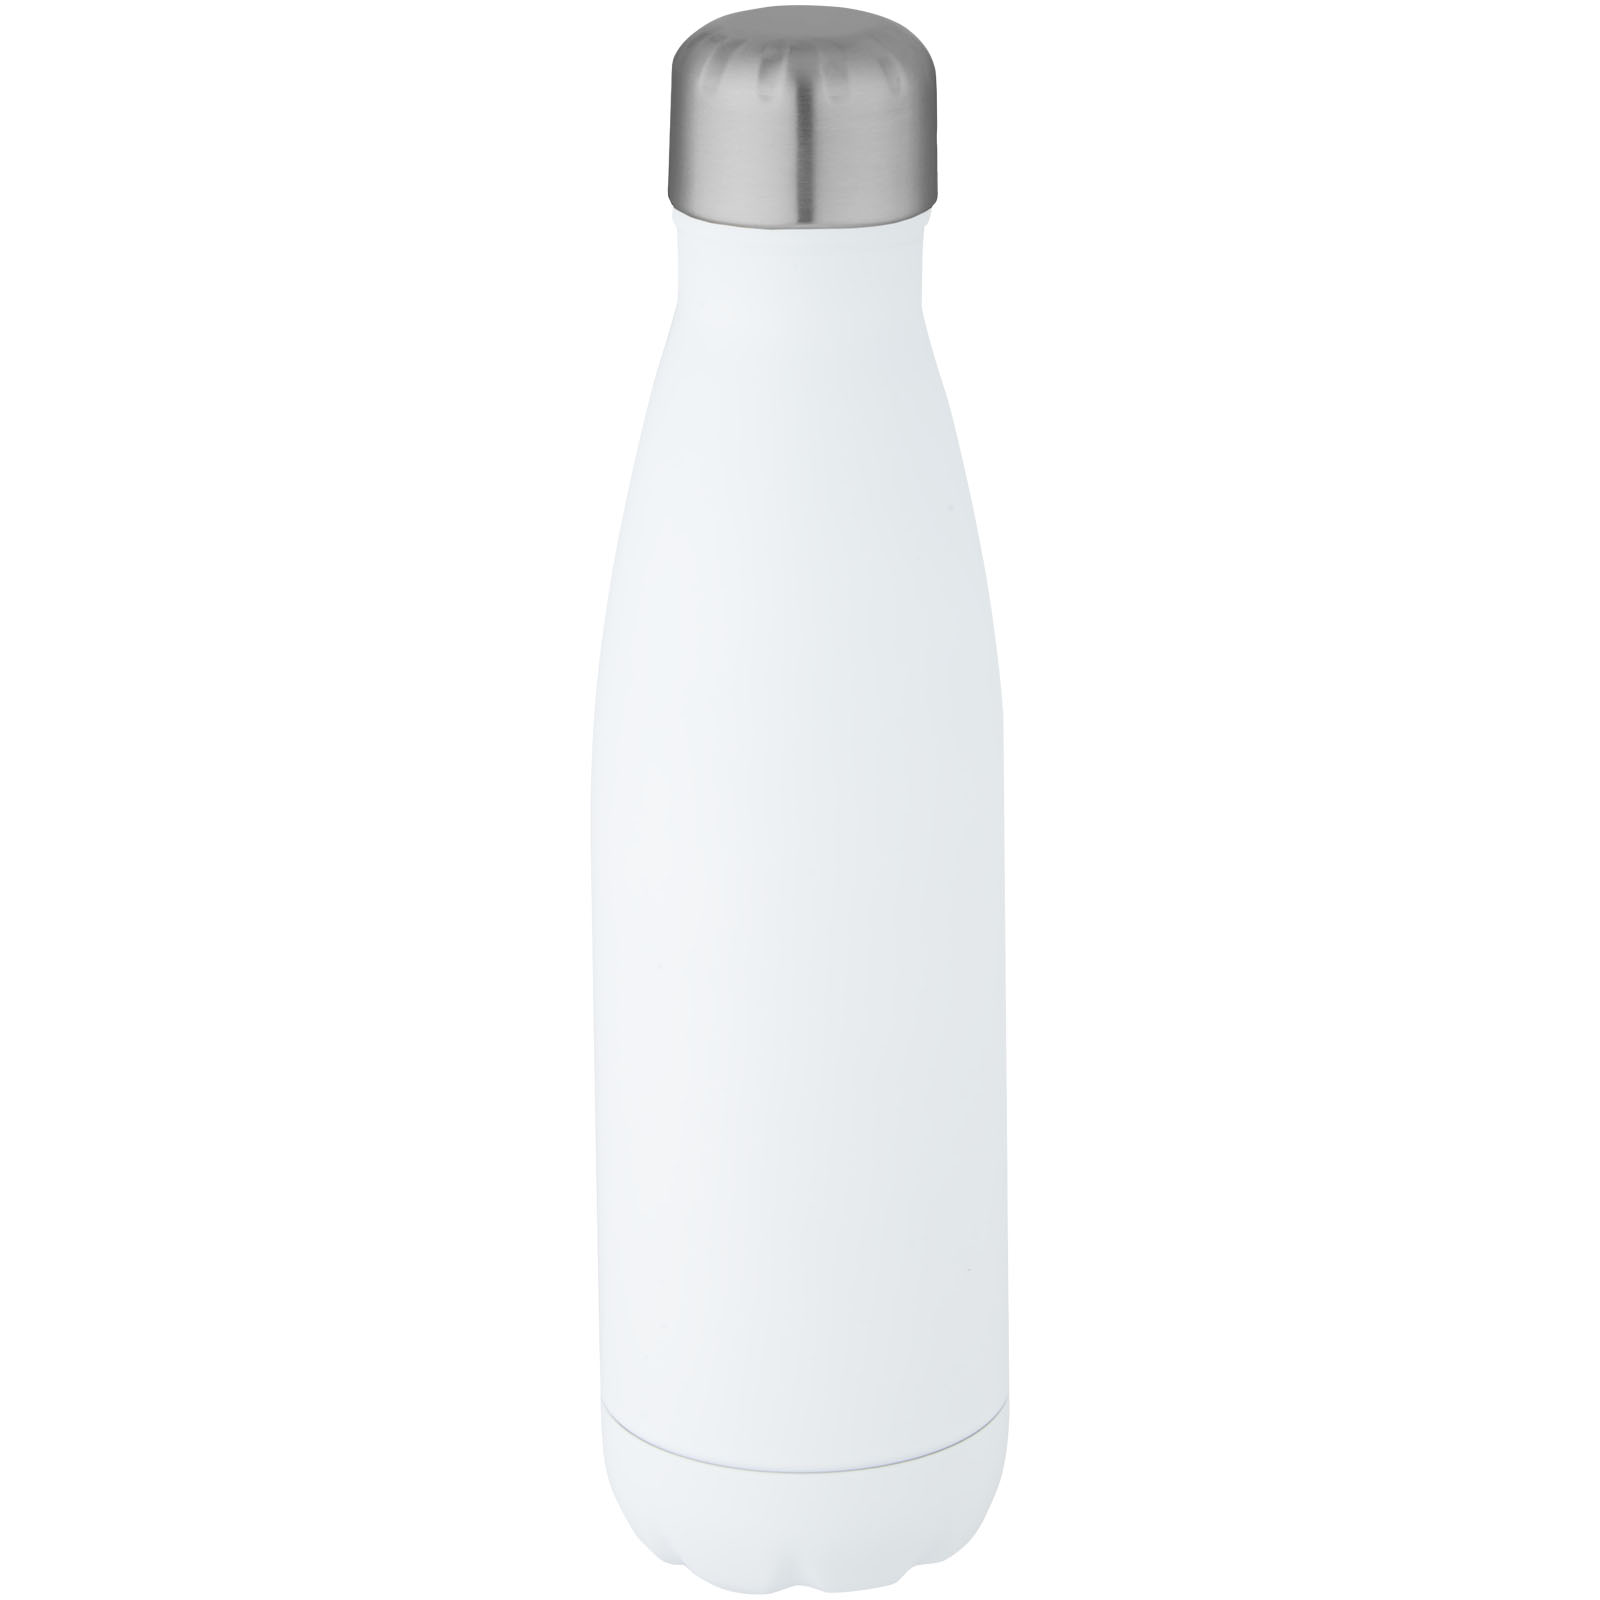 Cove 500 ml RCS certified stainless steel vacuum-insulated bottle made from recycled materials - Sandford Orcas